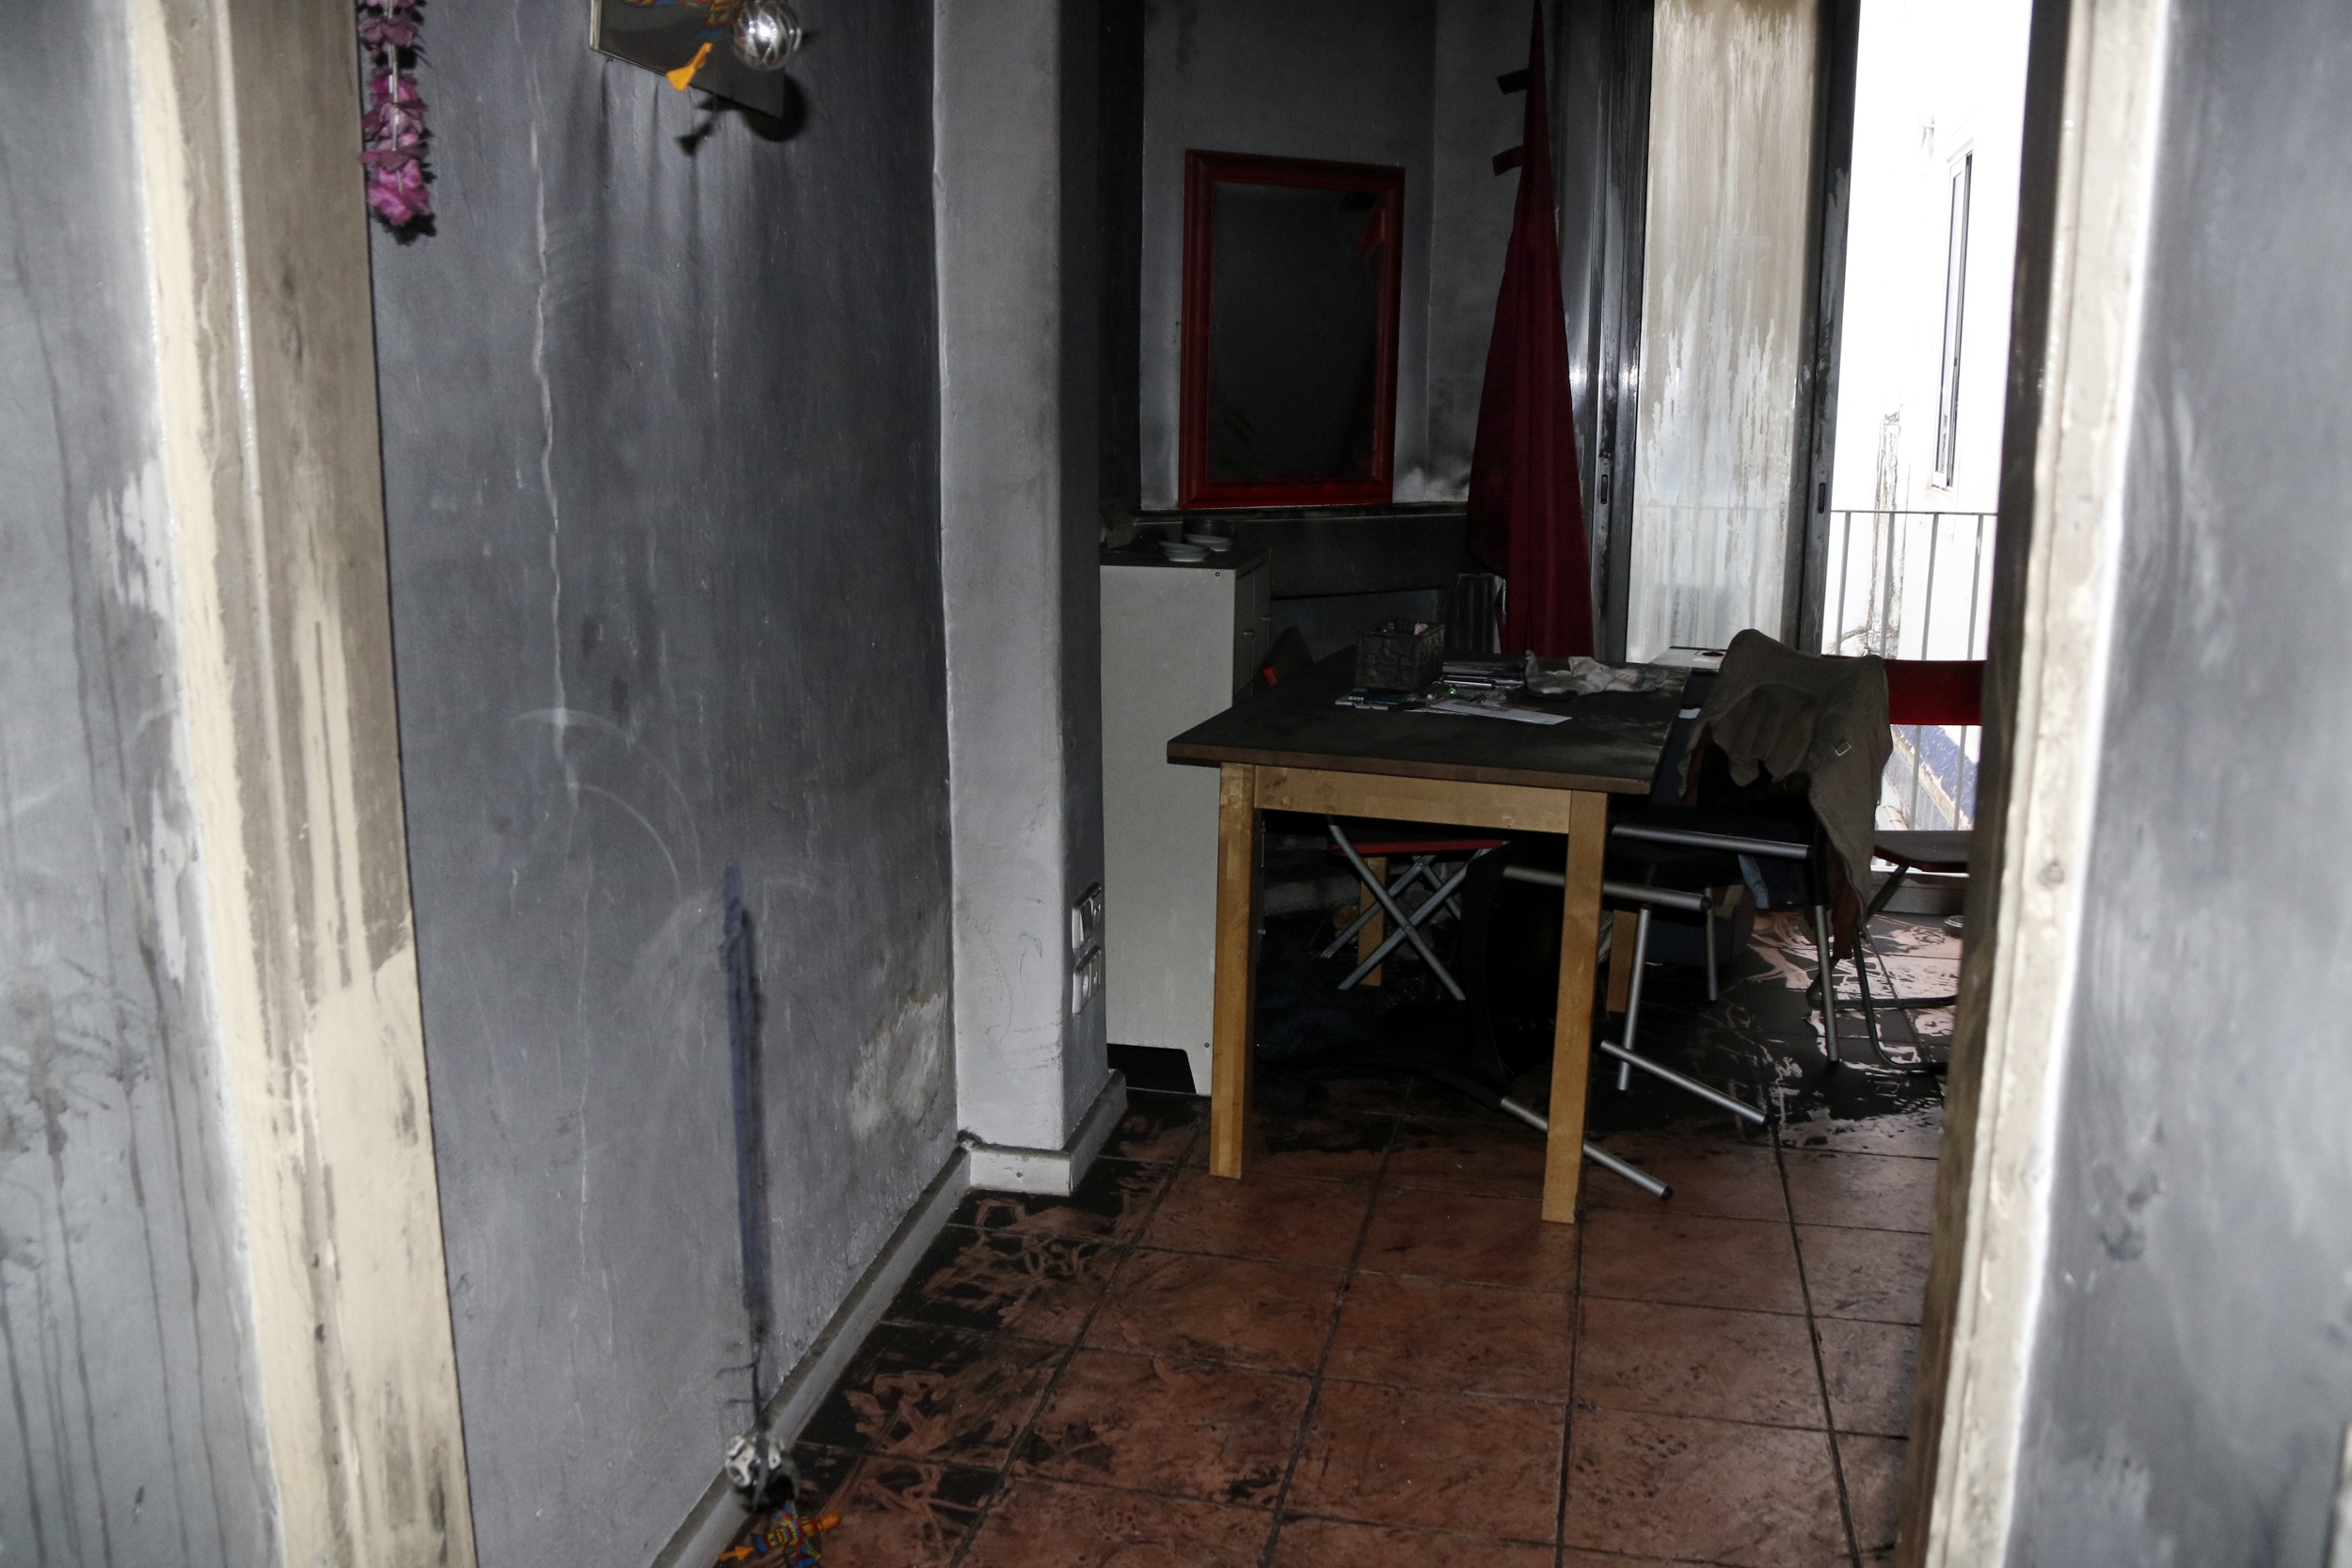 Picture of the flat were the 81-ýears-old woman was living in Reus, after the fire (by ACN)